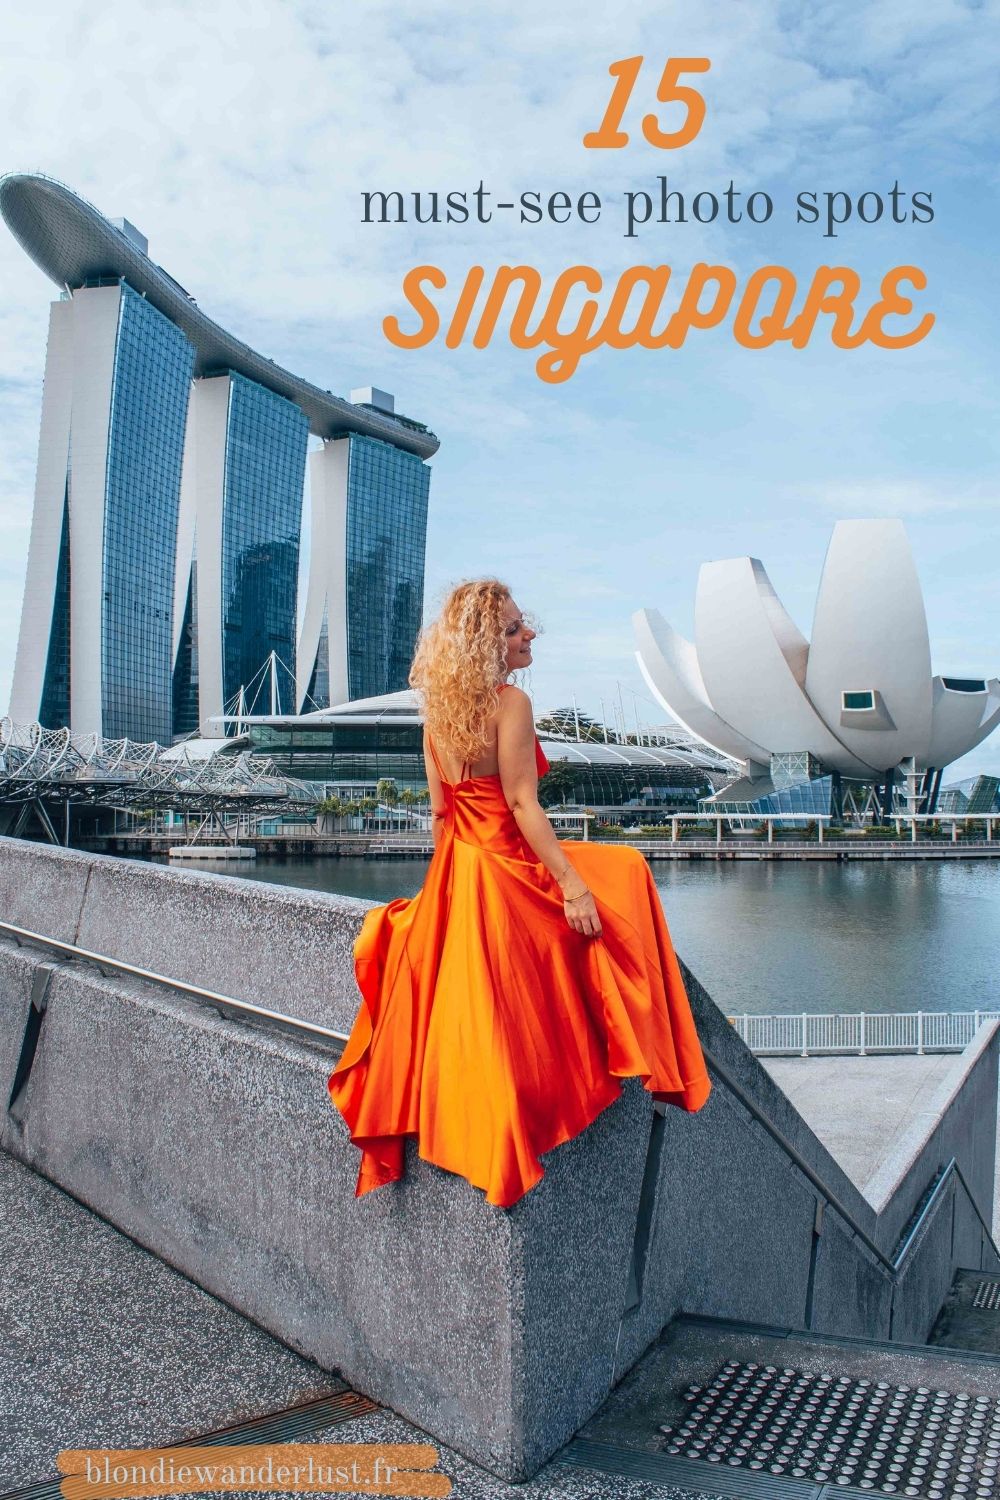 Must-see photo spots in Singapore, the full guide